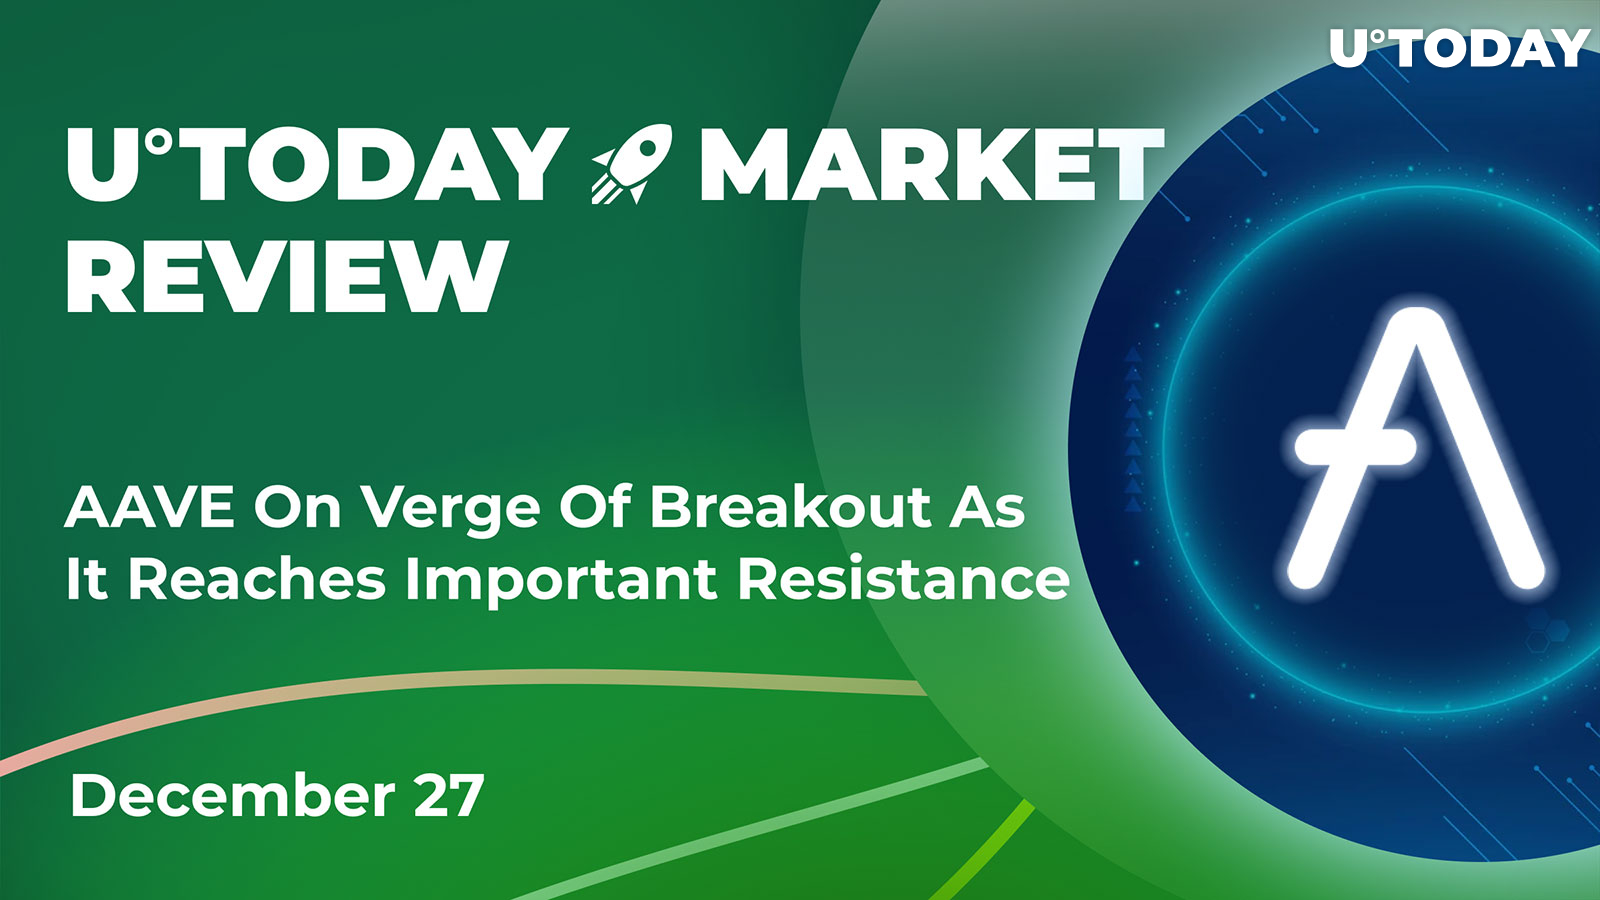 AAVE on Verge of Breakout as It Reaches Important Resistance: Crypto Market Review, Dec. 27